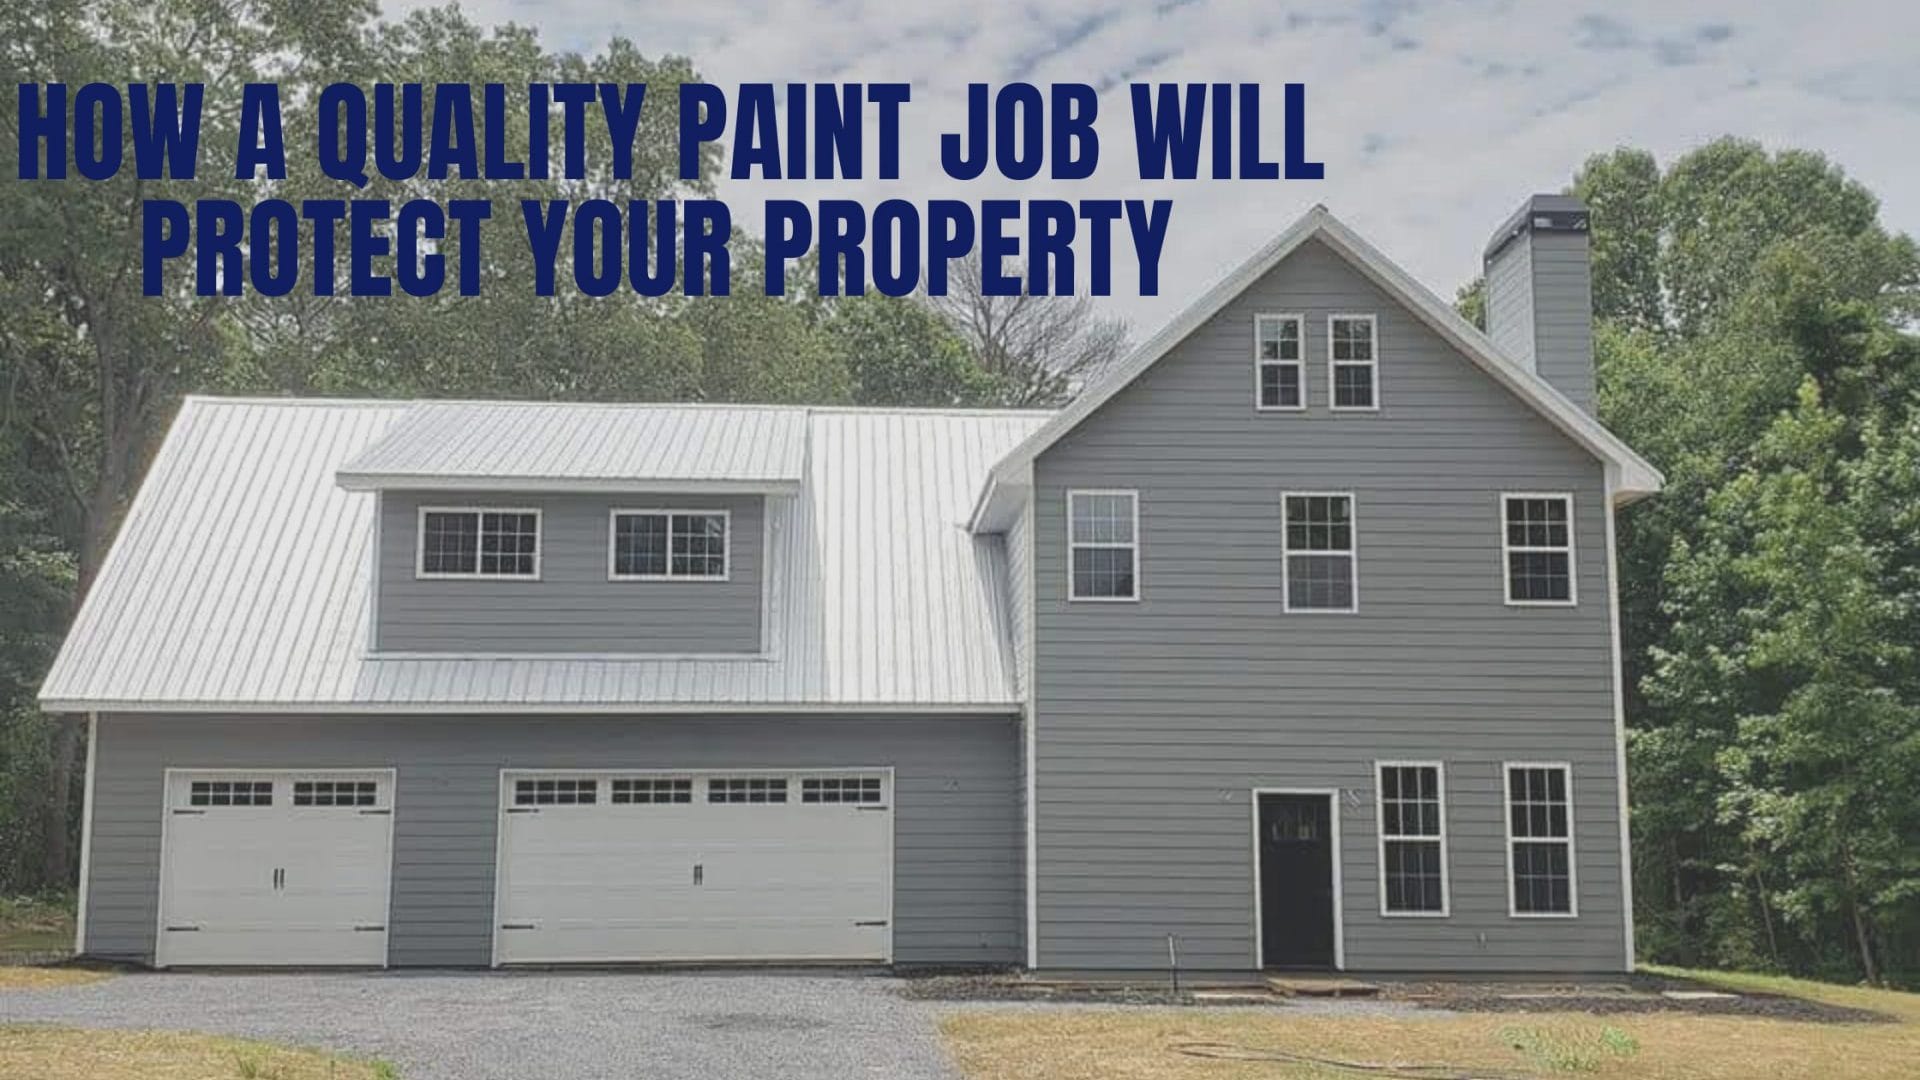 Investing in good quality paint protects not only the exterior of your home, but also increases the value because home values rise with paint jobs. It keeps the interior clean and comfortable, as well – another bonus when you want to sell your house. And, of course, it prevents damage from unsightly humidity, mold, and debris that can ruin your beautiful home without receiving any pricey repairs!